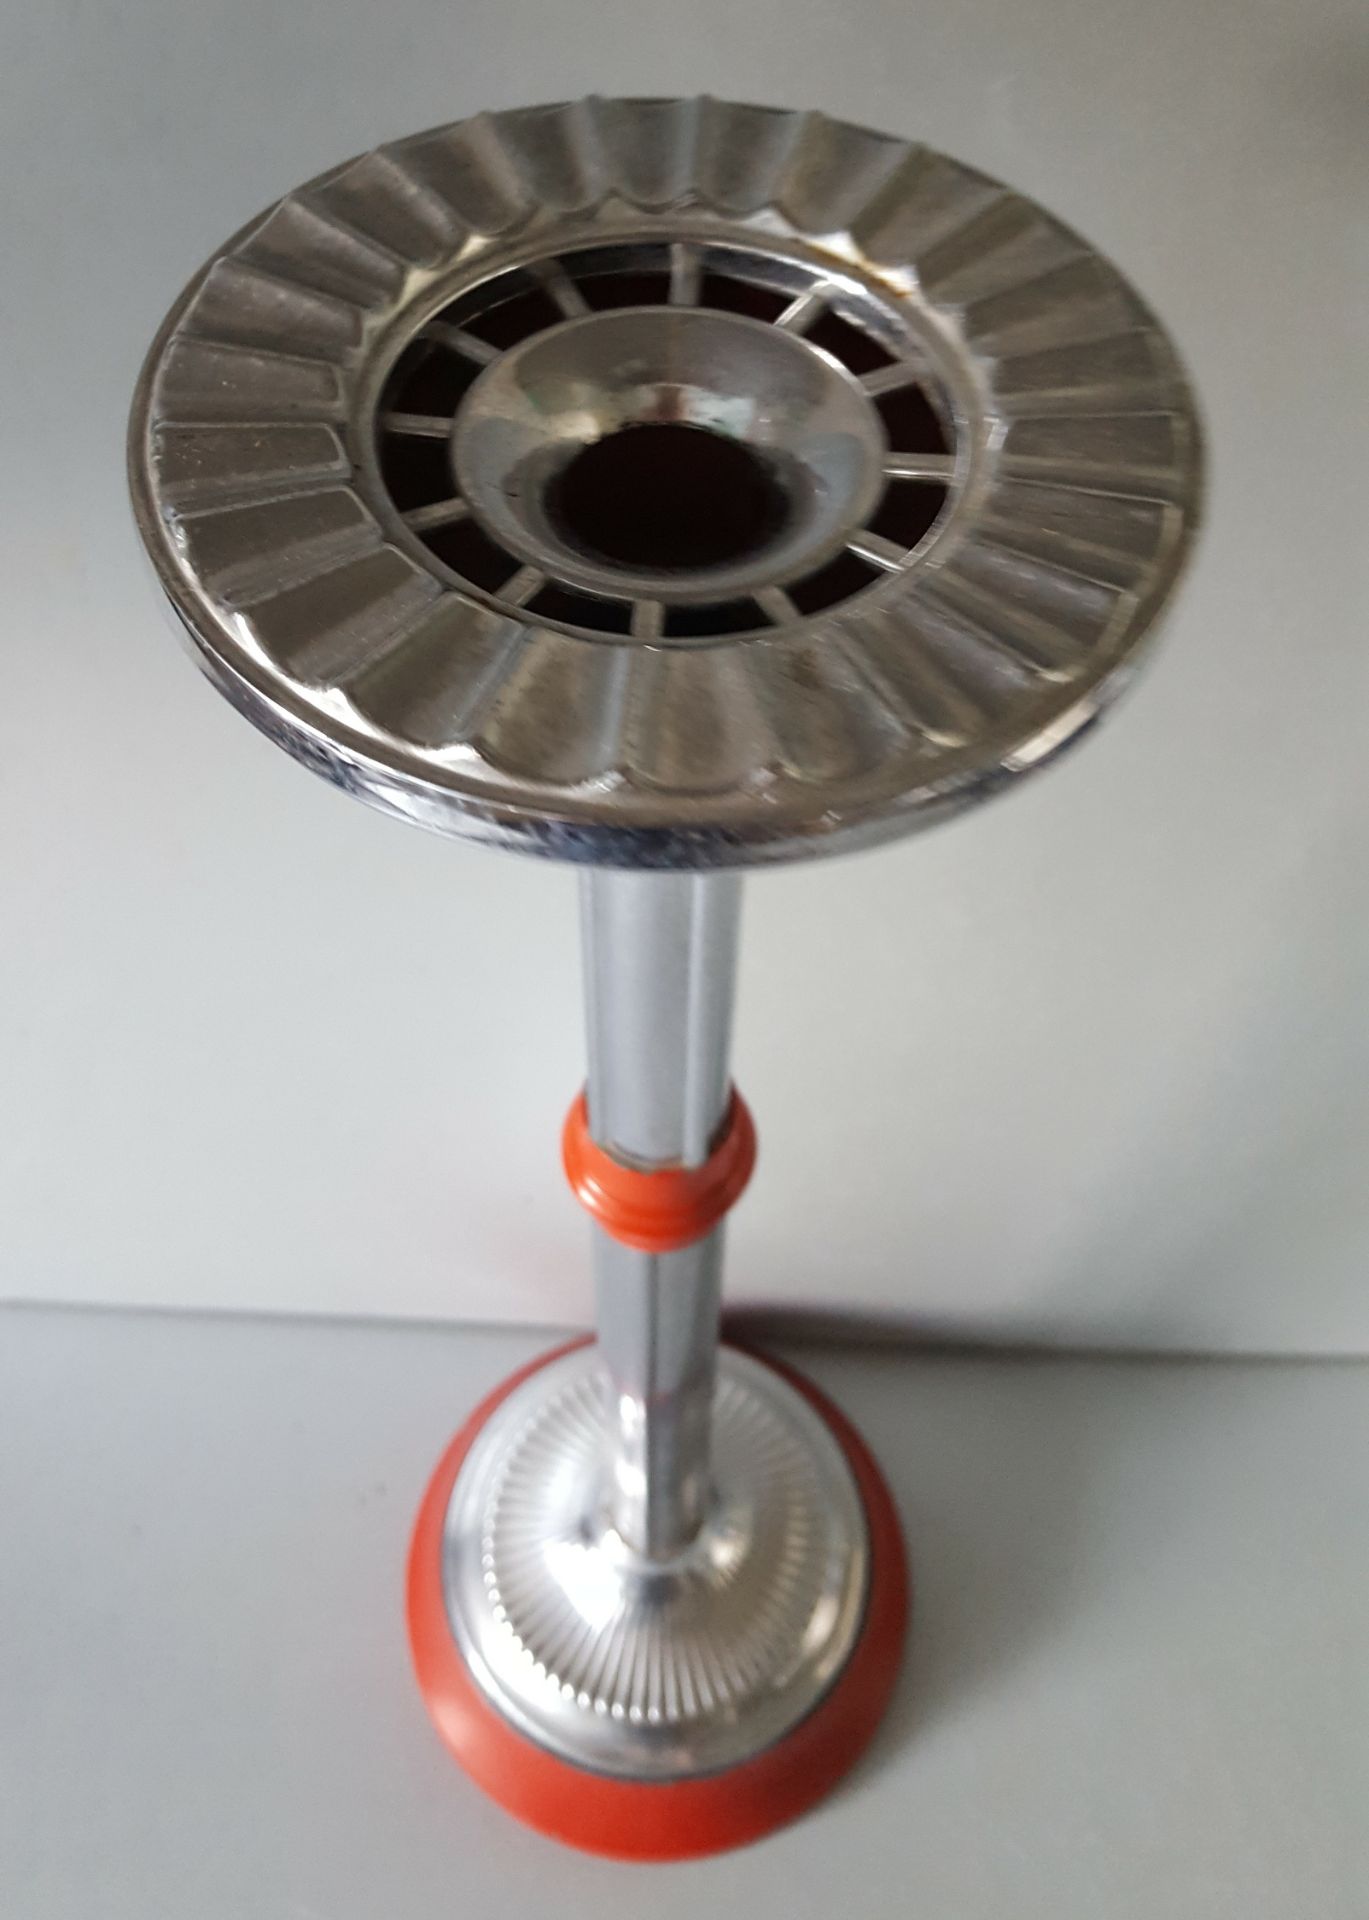 Vintage Retro Kitsch Red & Silver Coloured Metal Ashtray on Stand 1970's - Image 2 of 3